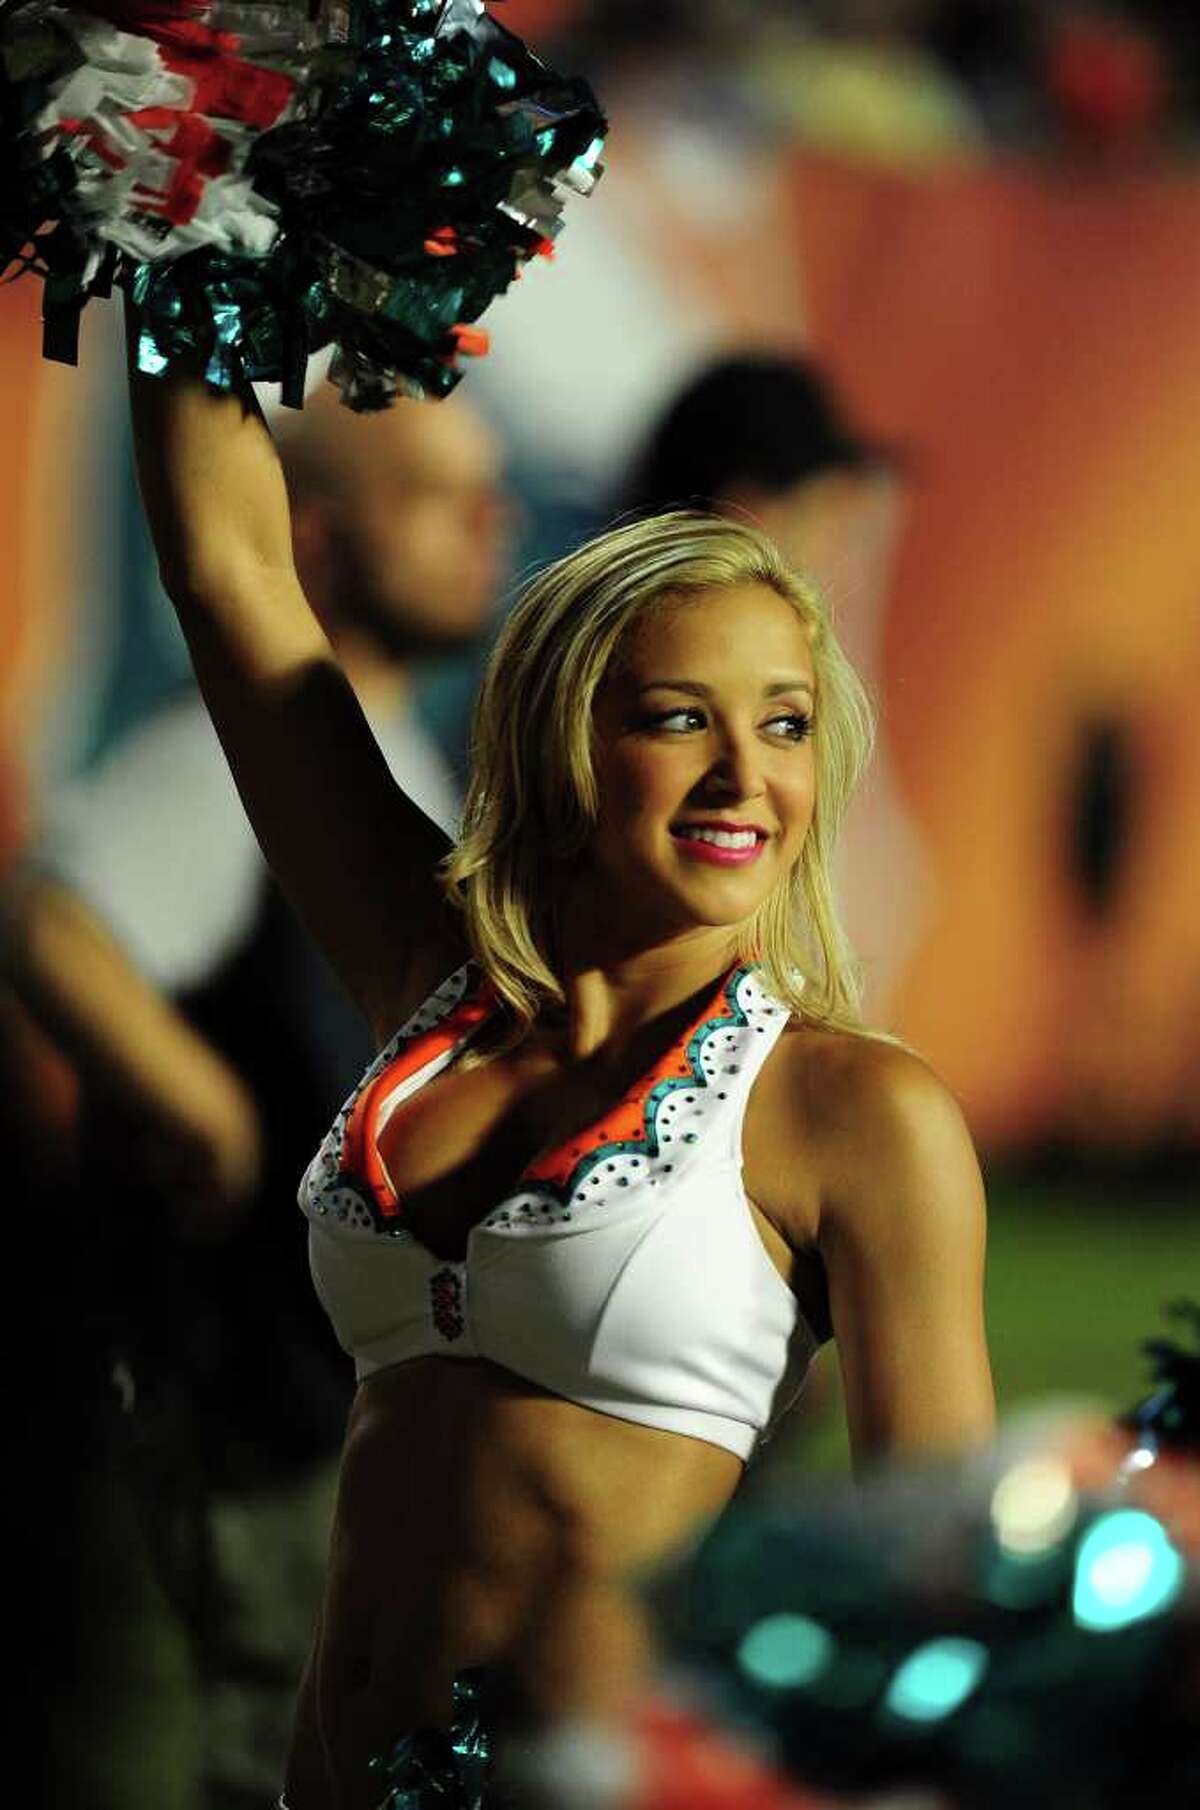 MIAMI - OCTOBER 4: A member of the Miami Dolphins Cheerleaders performs during the game against the New England Patriots at Sun Life Field on October 4, 2010 in Miami, Florida. (Photo by Scott Cunningham/Getty Images)